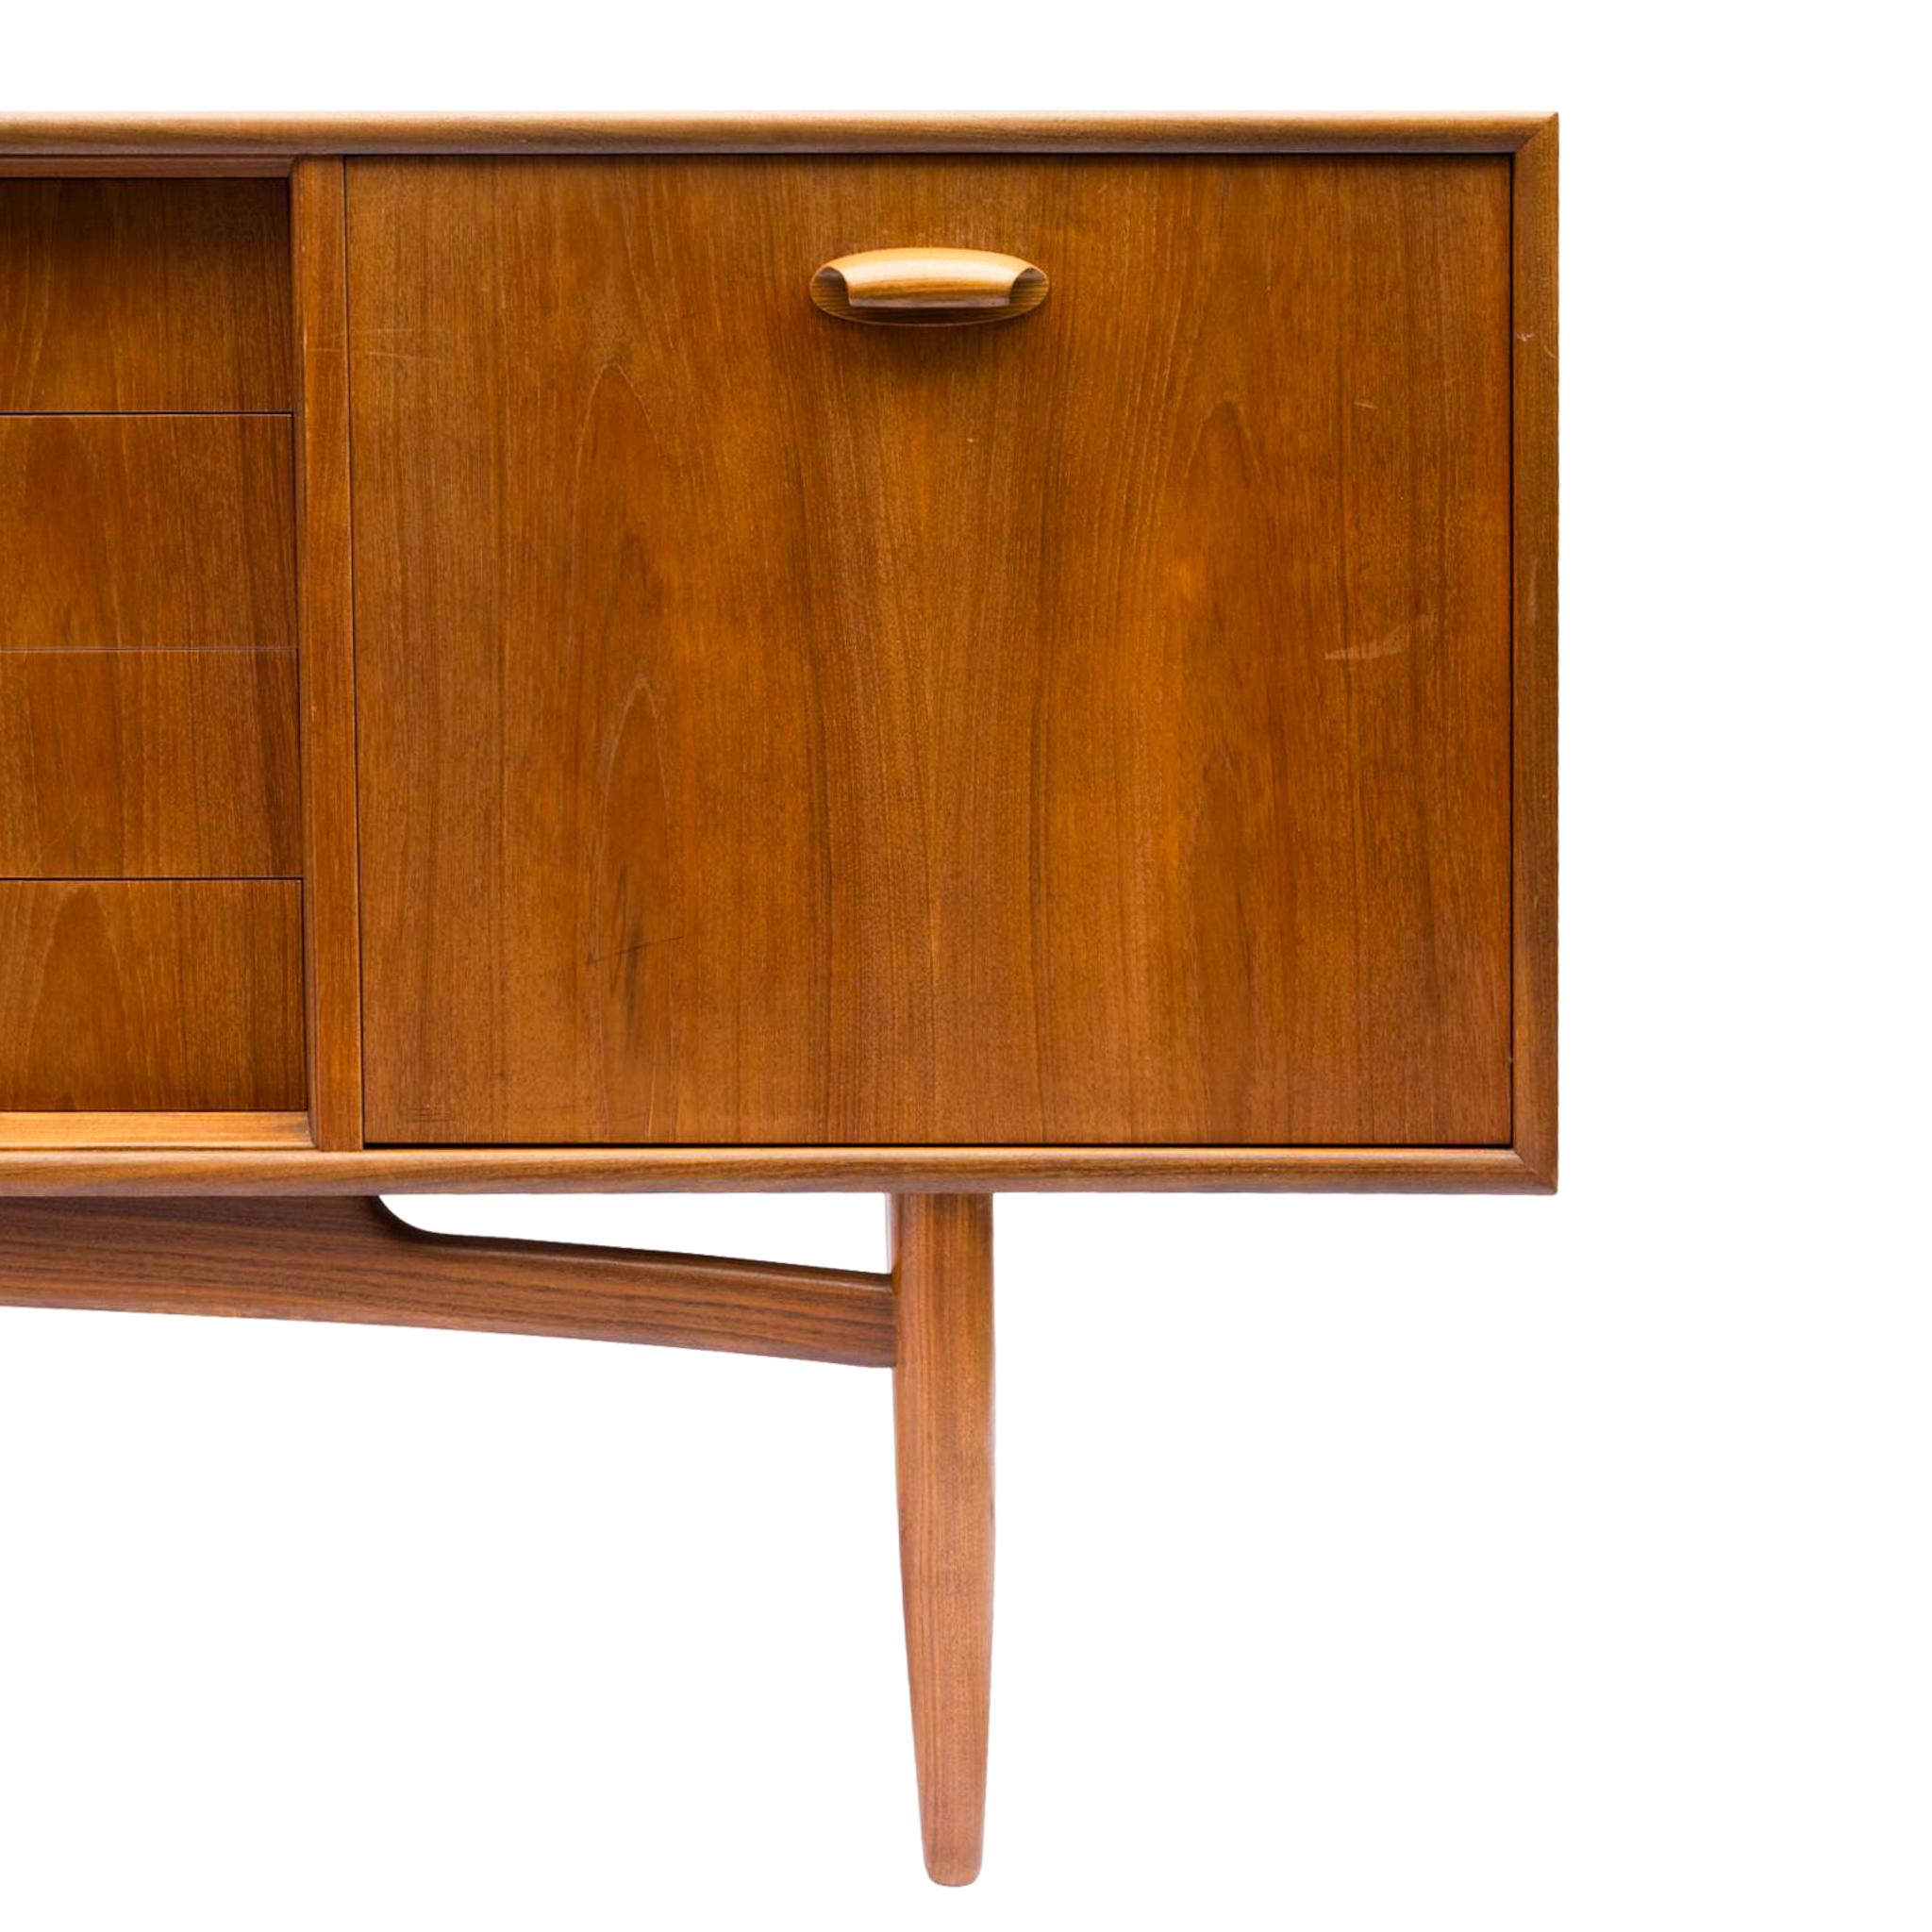 Mid-20th Century Mid-Century Modern Teak Sideboard with Drinks Cabinet, Signed G-Plan, circa 1960